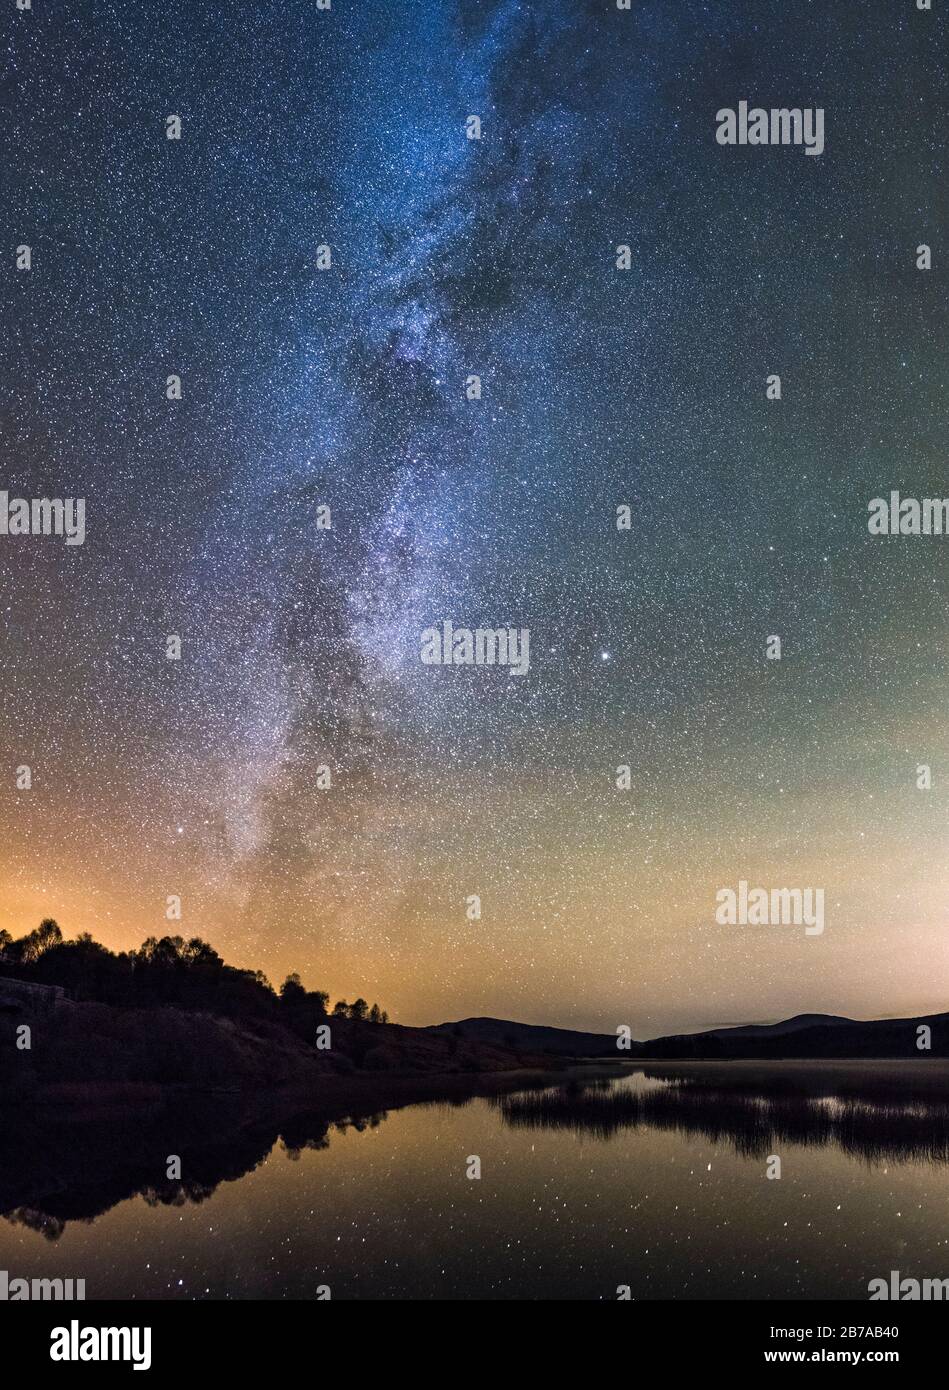 Milky Way and stars over Loch Stroan, Galloway Dark Sky Park, Galloway Forest, Dumfries & Galloway, Scotland Stock Photo